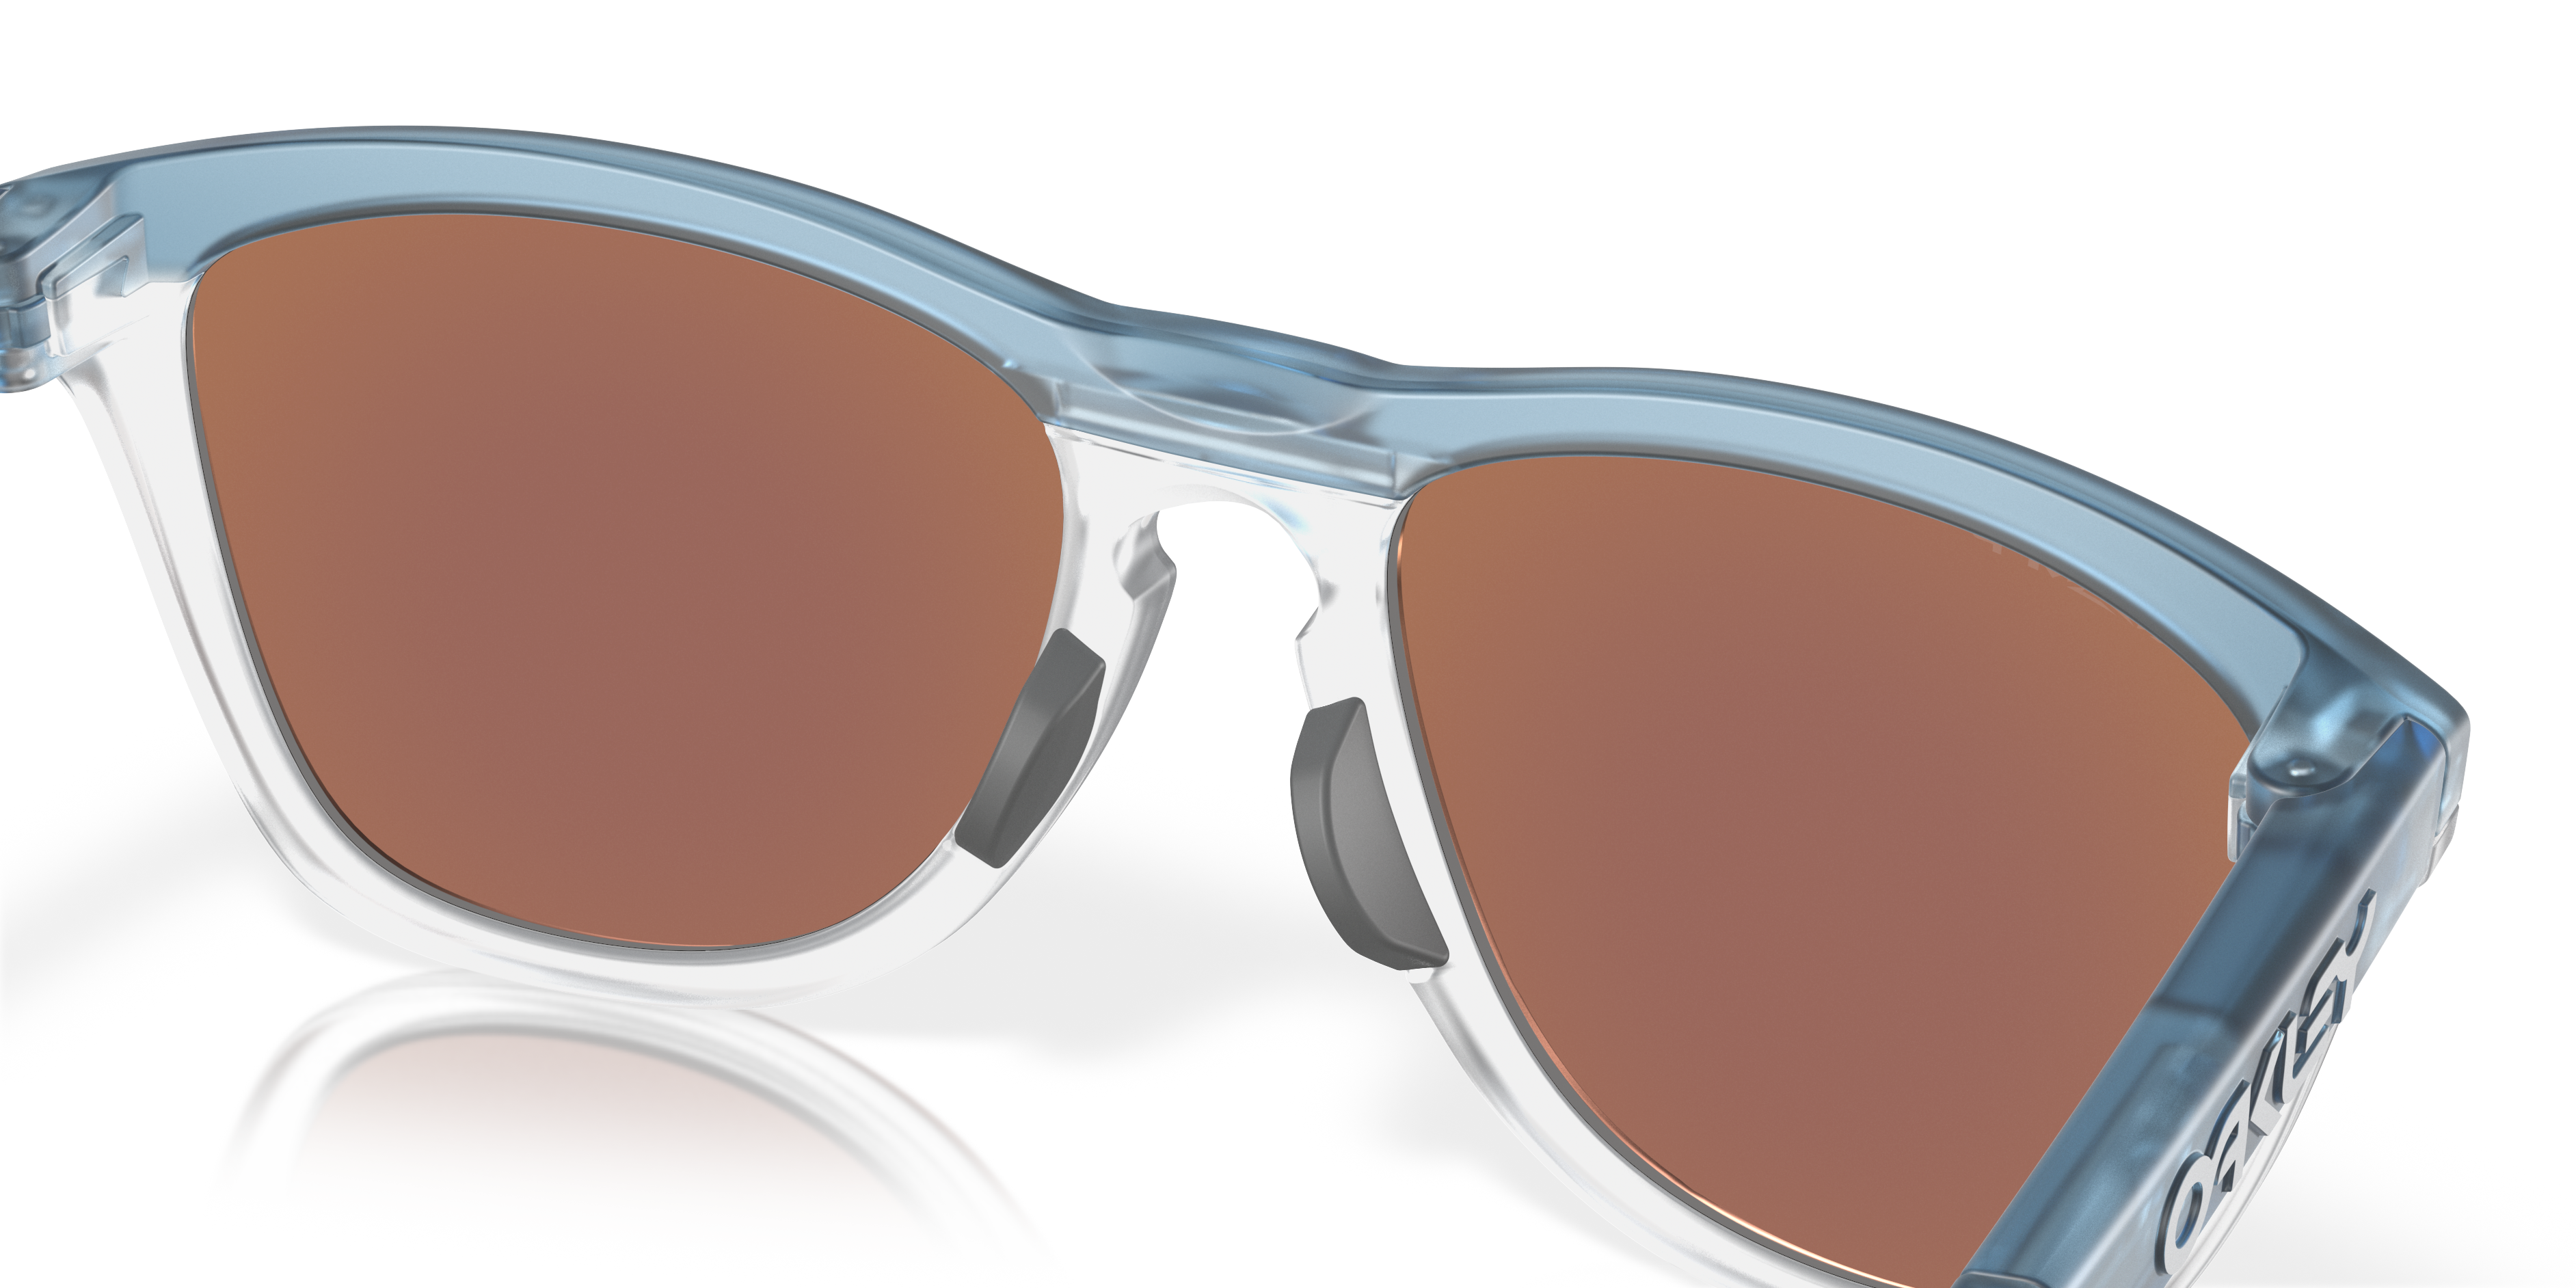 [products.image.detail03] Oakley Frogskins Range 0OO9284 928409